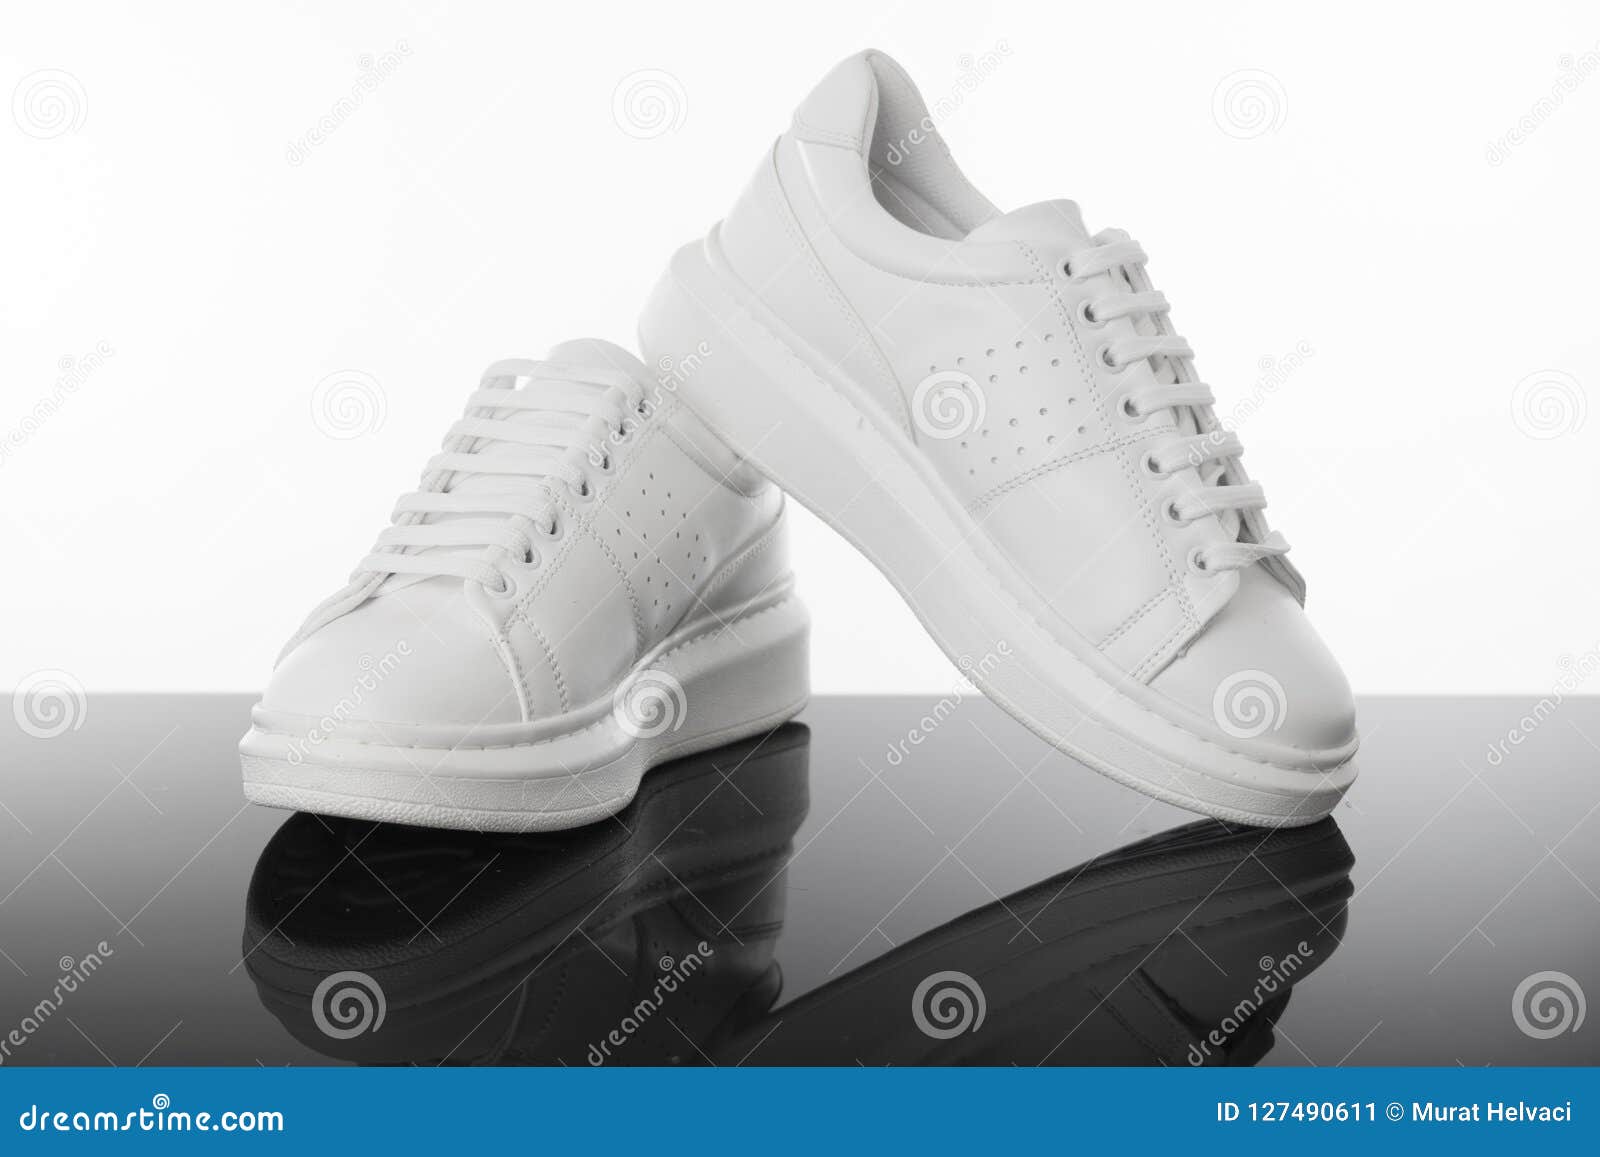 Pair of White Sport Sneaker Shoes Stock Image - Image of object, blue ...